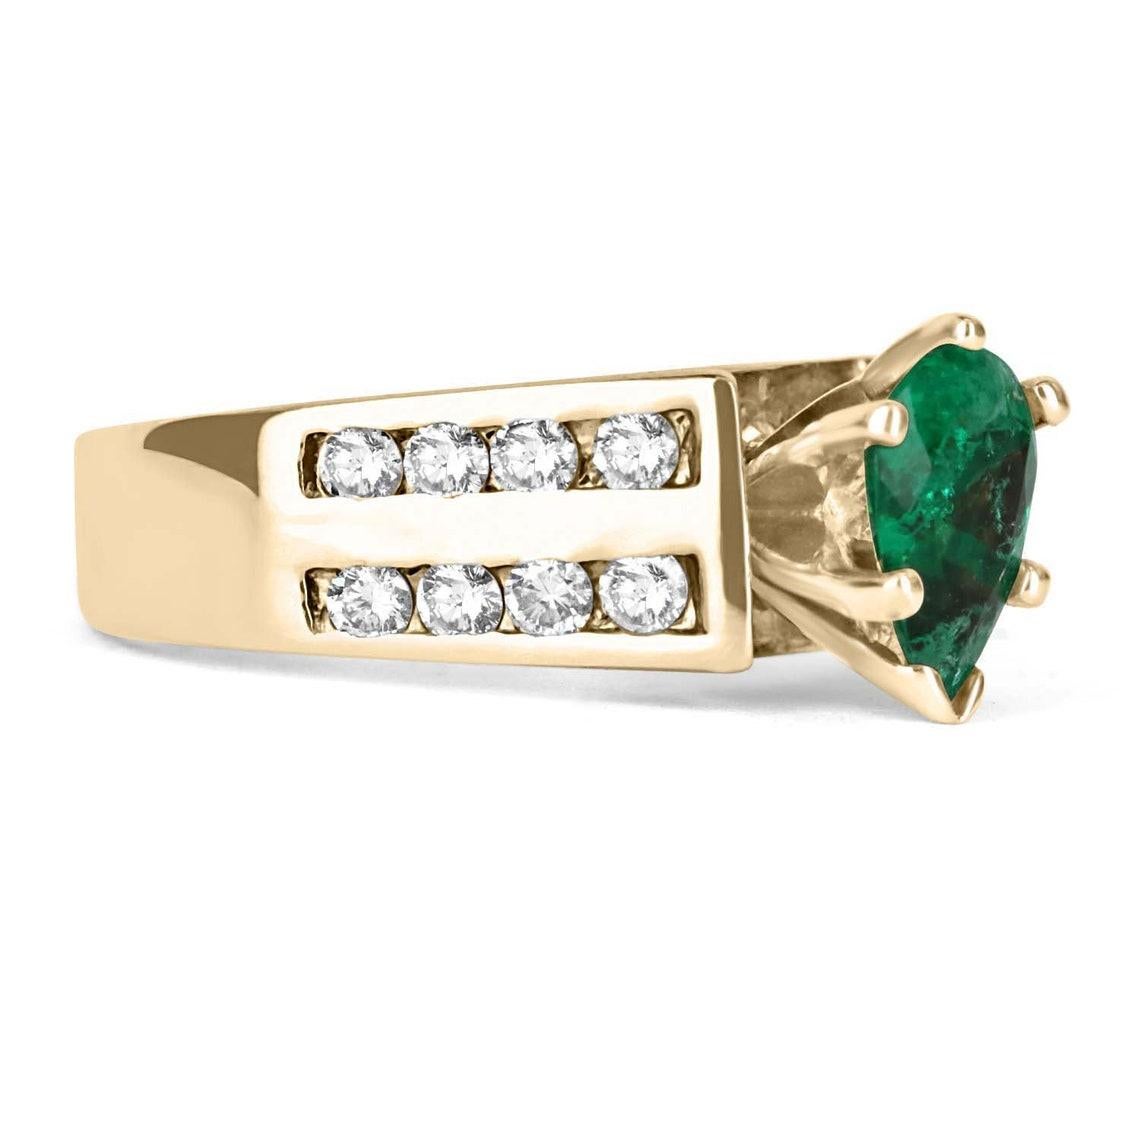 Displayed is a spectacular pear-shaped Colombian emerald and diamond cocktail ring. Set in 14k yellow gold, the sublime emerald weighs a perfect 0.80-carats and is set alongside sixteen high-quality, brilliant round diamonds in a fashionable channel